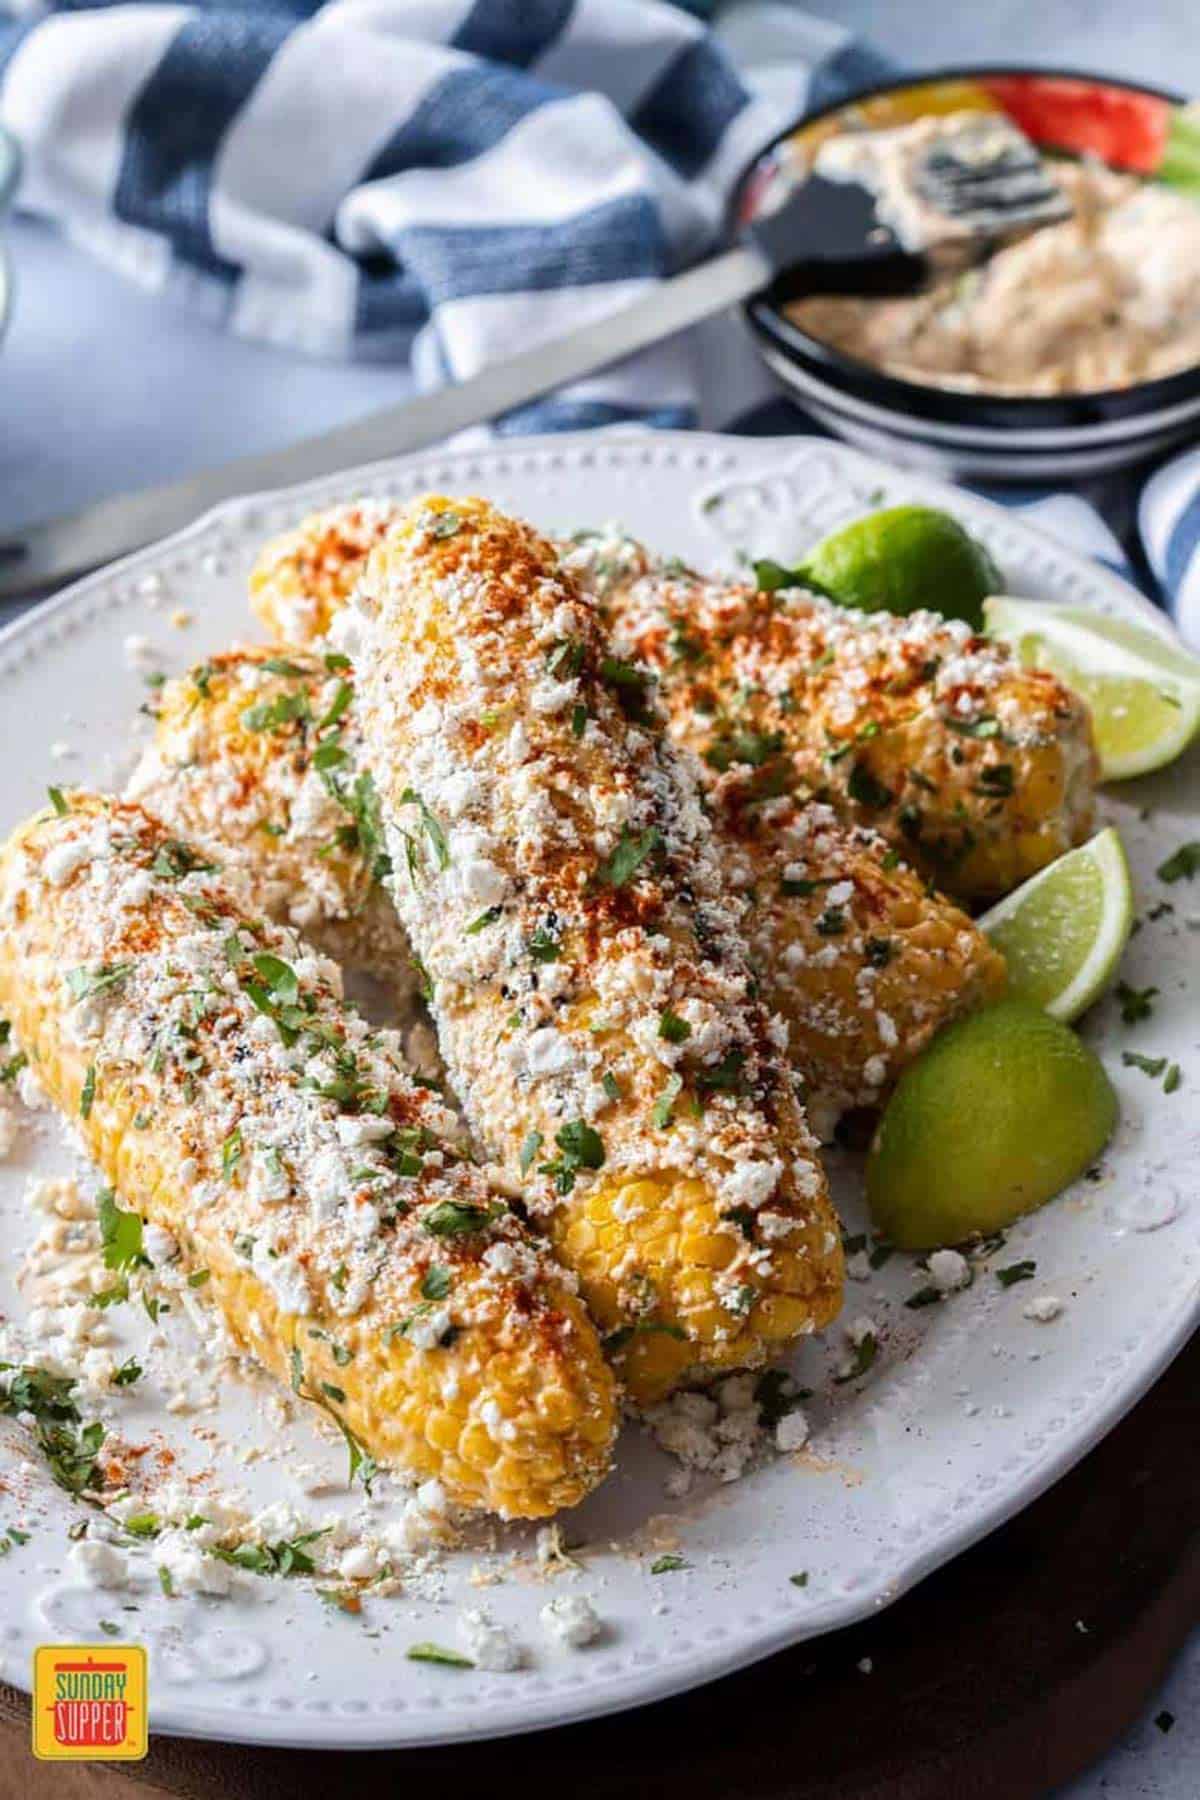 Grilled corn on the cob with Mexican Crema